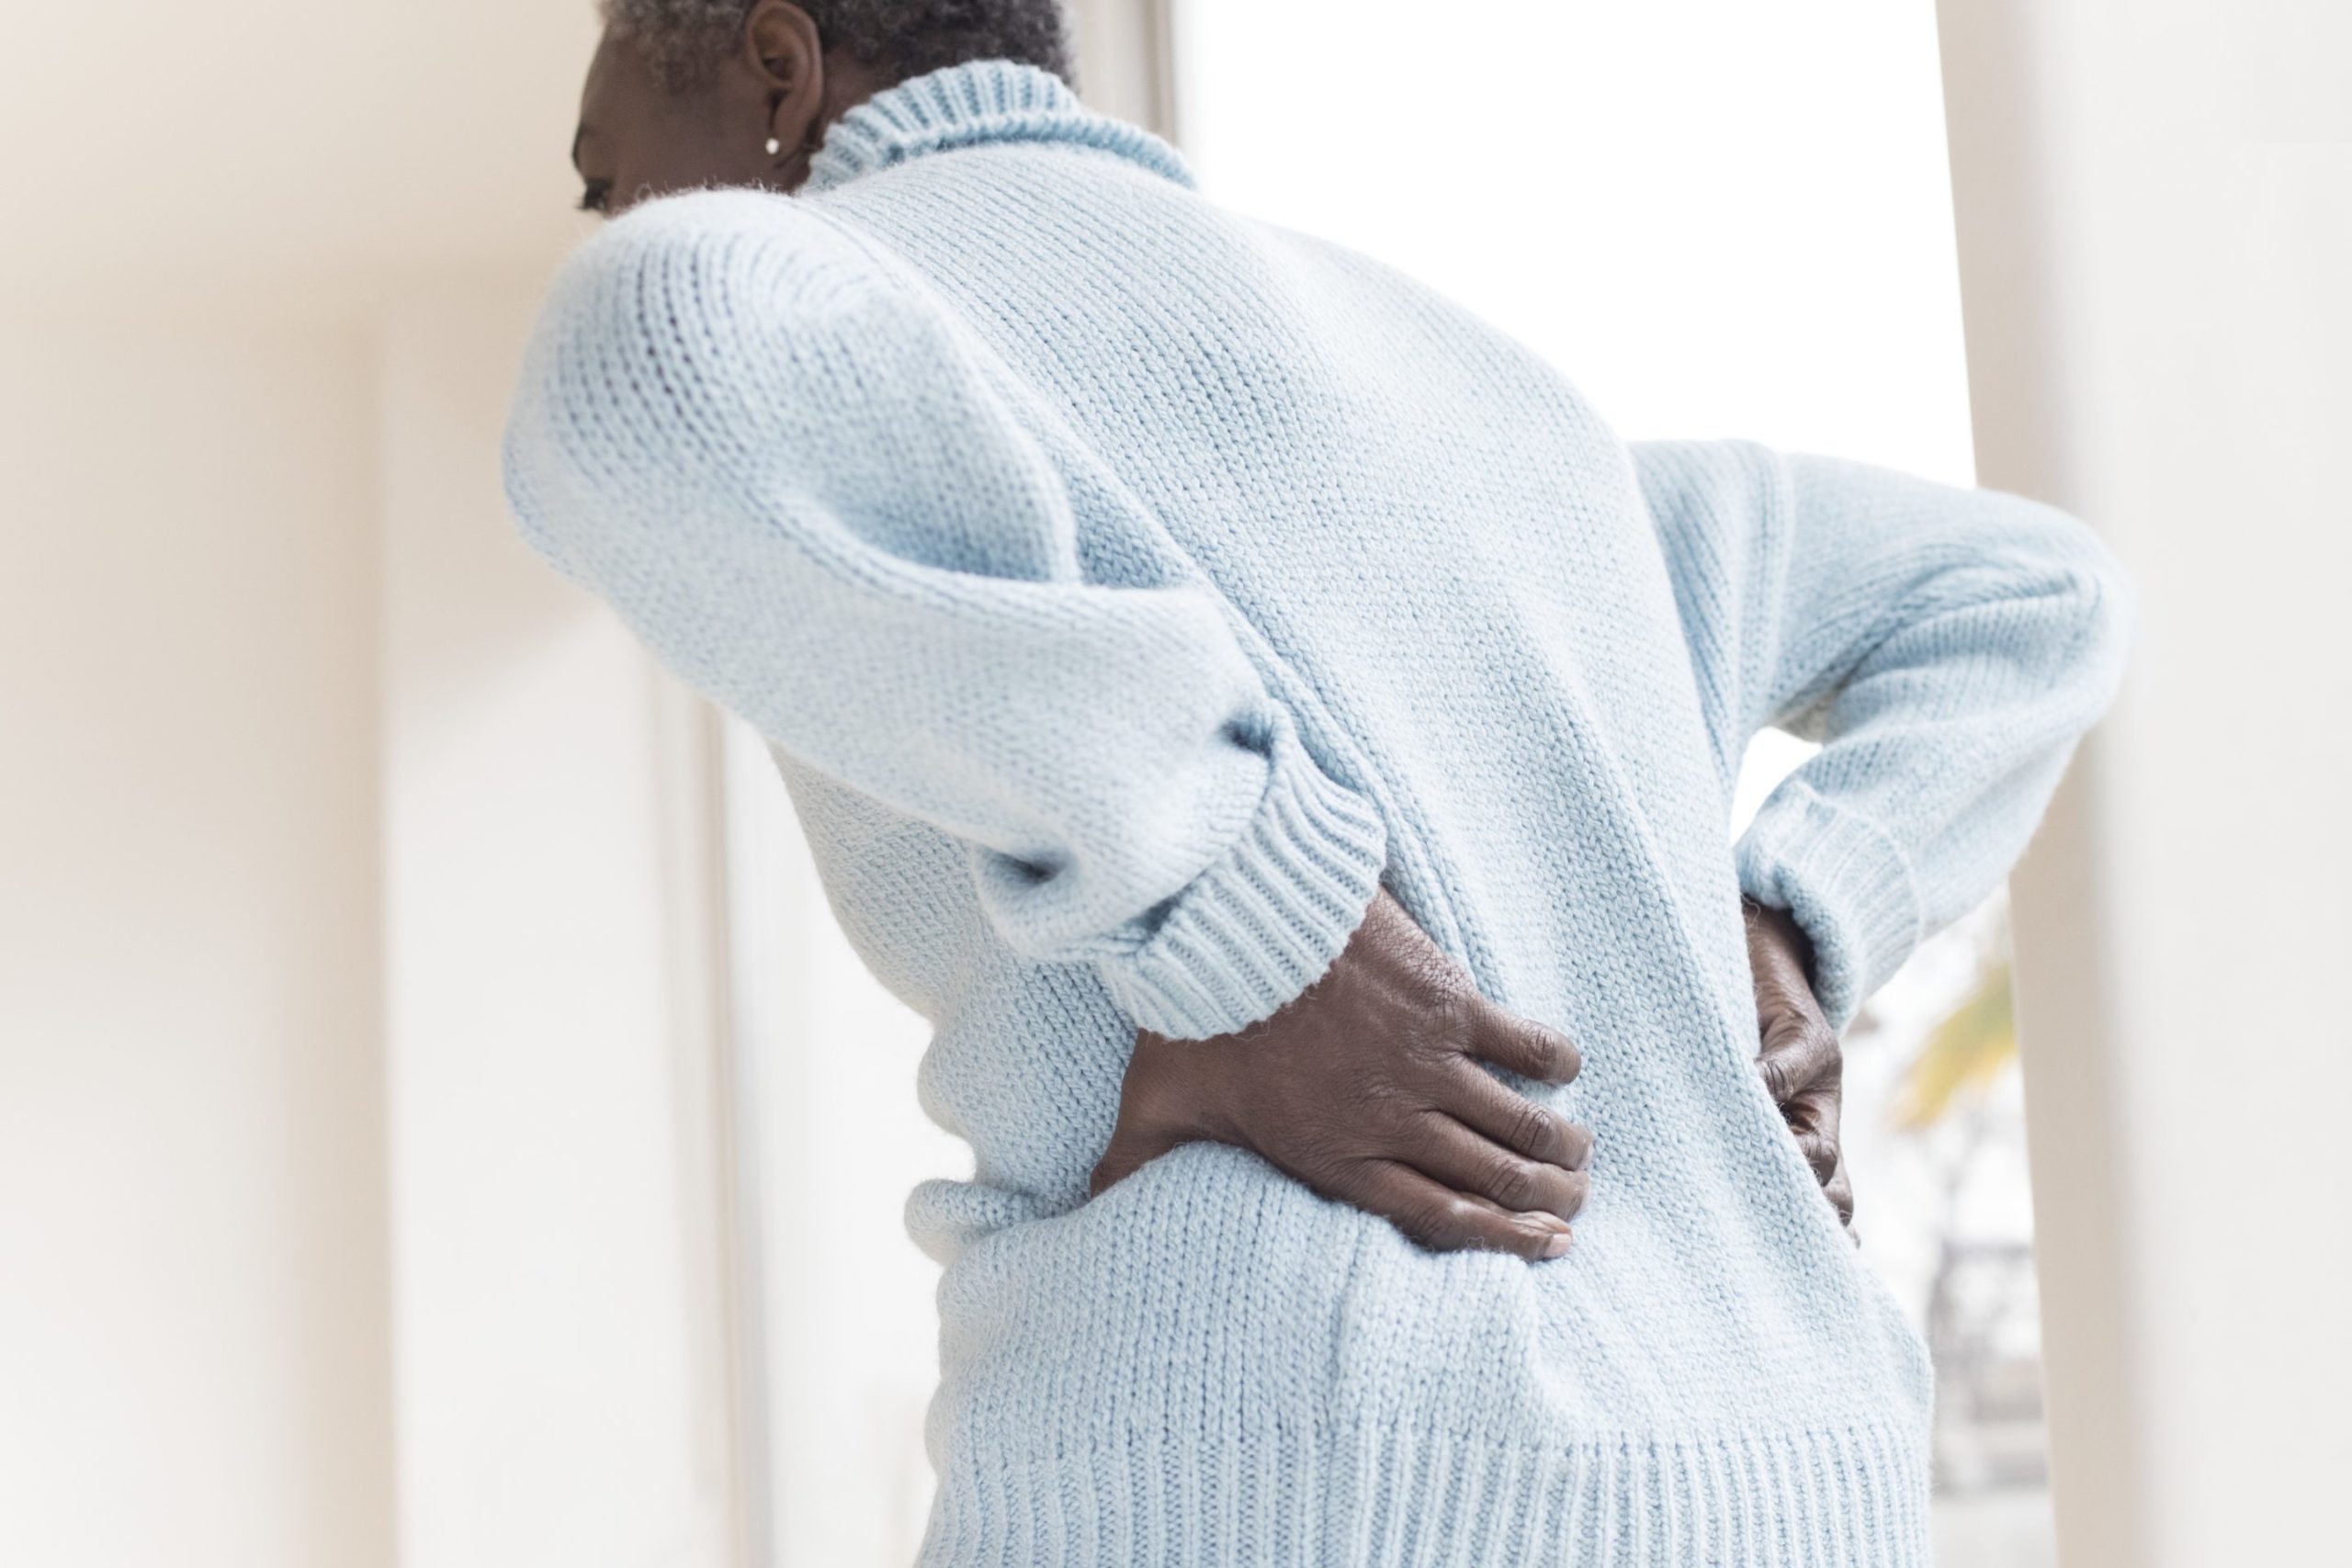 How over-the-counter pain relievers might make low back pain worse